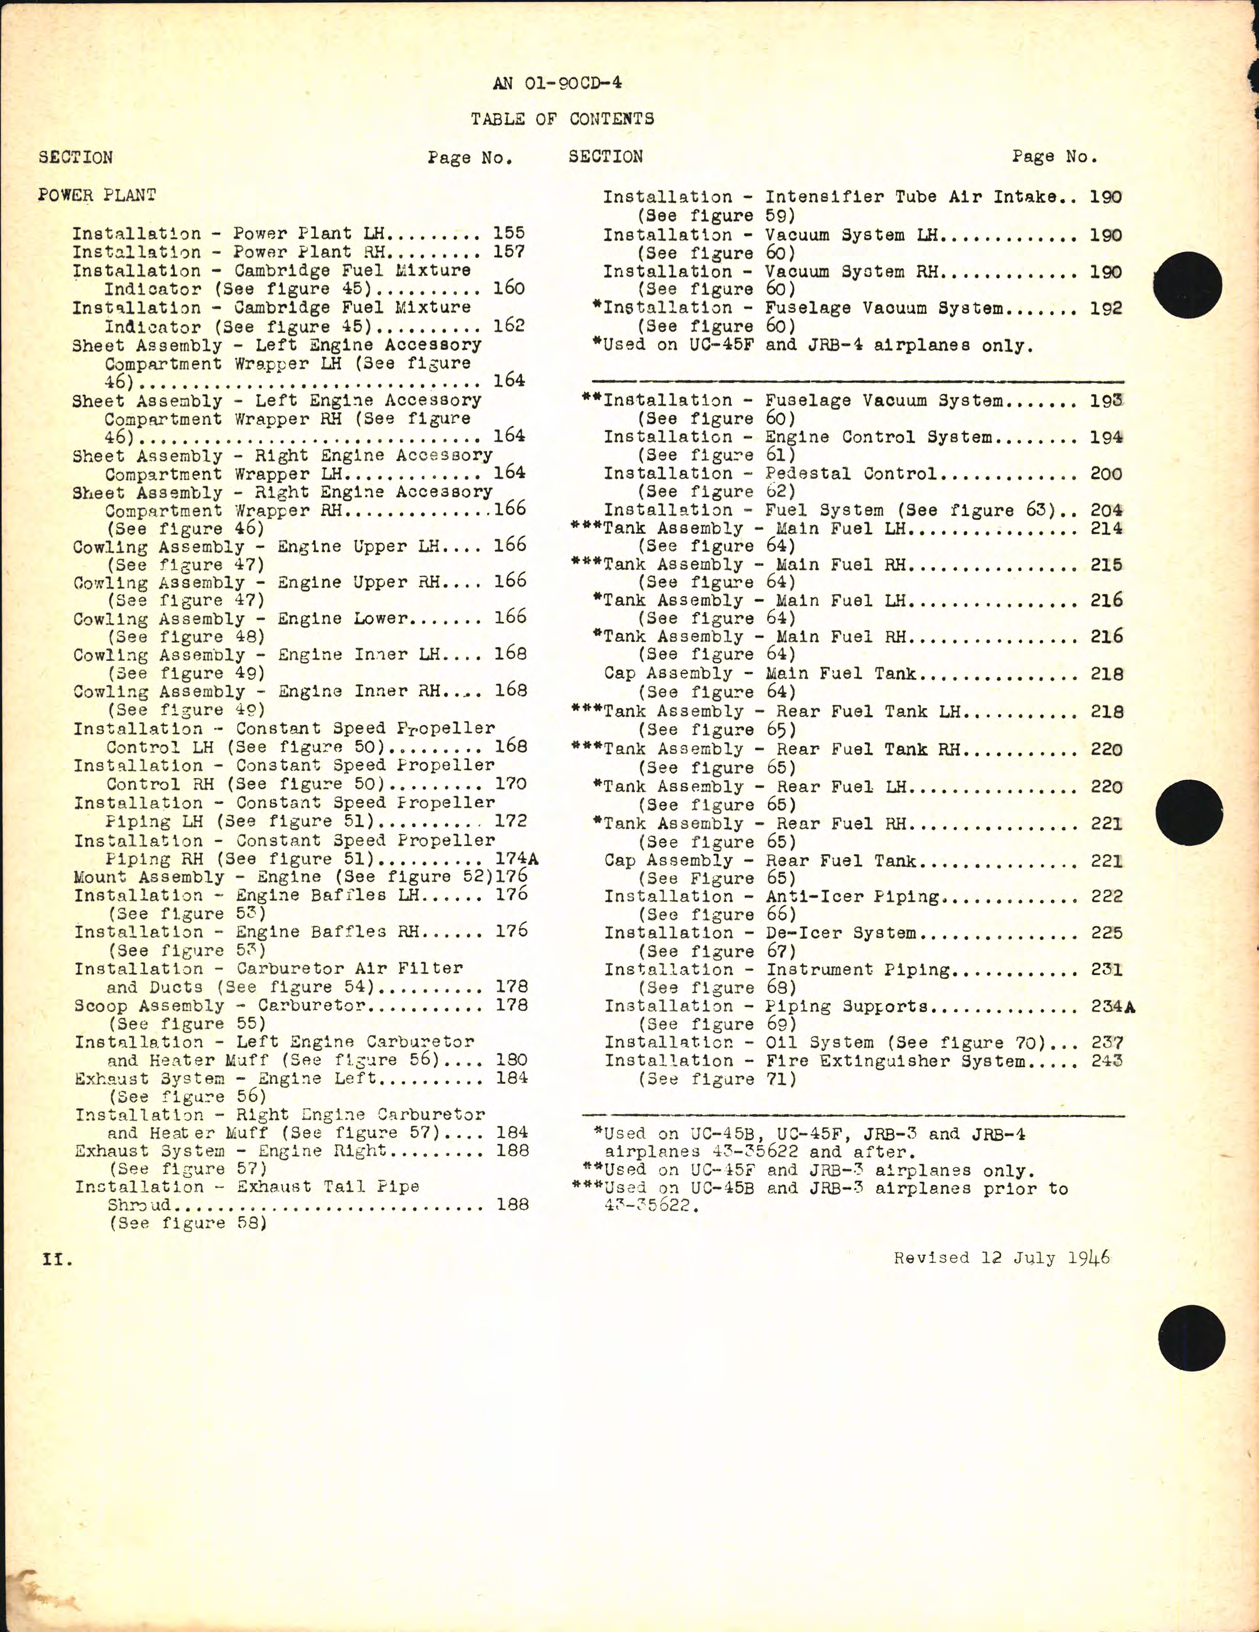 Sample page 6 from AirCorps Library document: Parts Catalog for C-45B, C-45F, JRB-3, and JRB-4